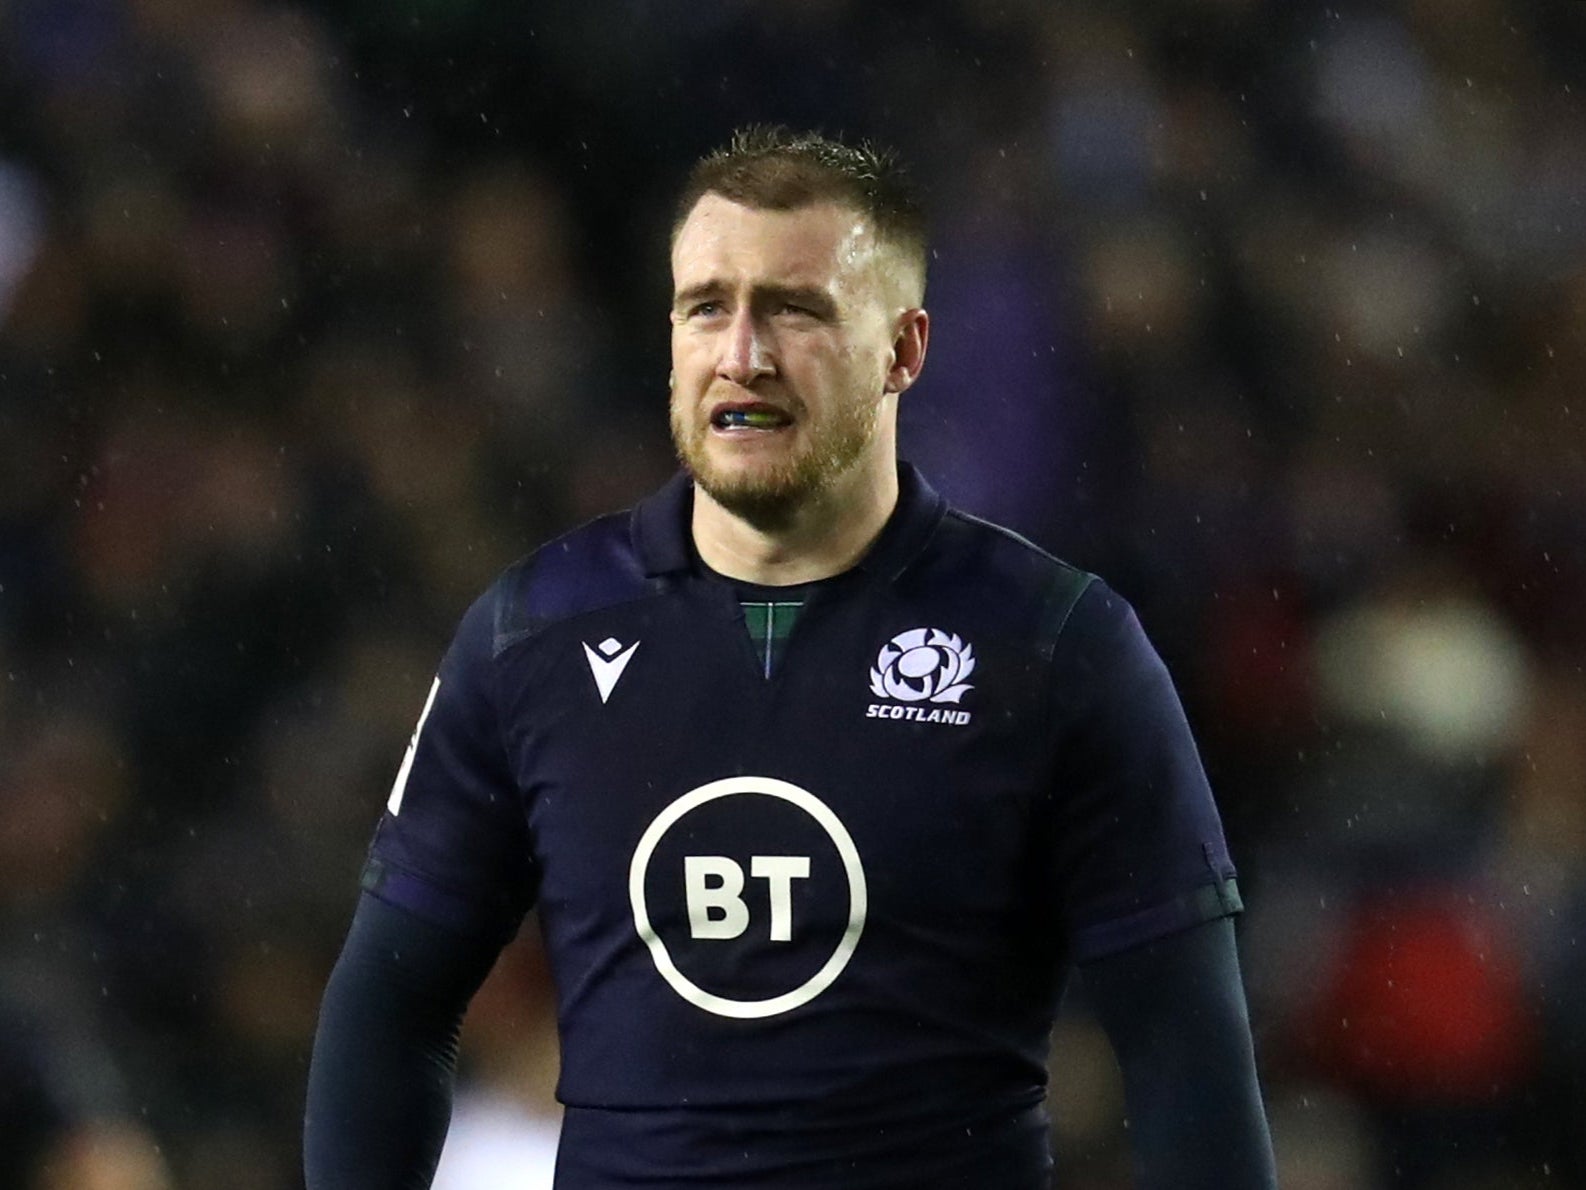 Stuart Hogg will captain the Lions on Saturday